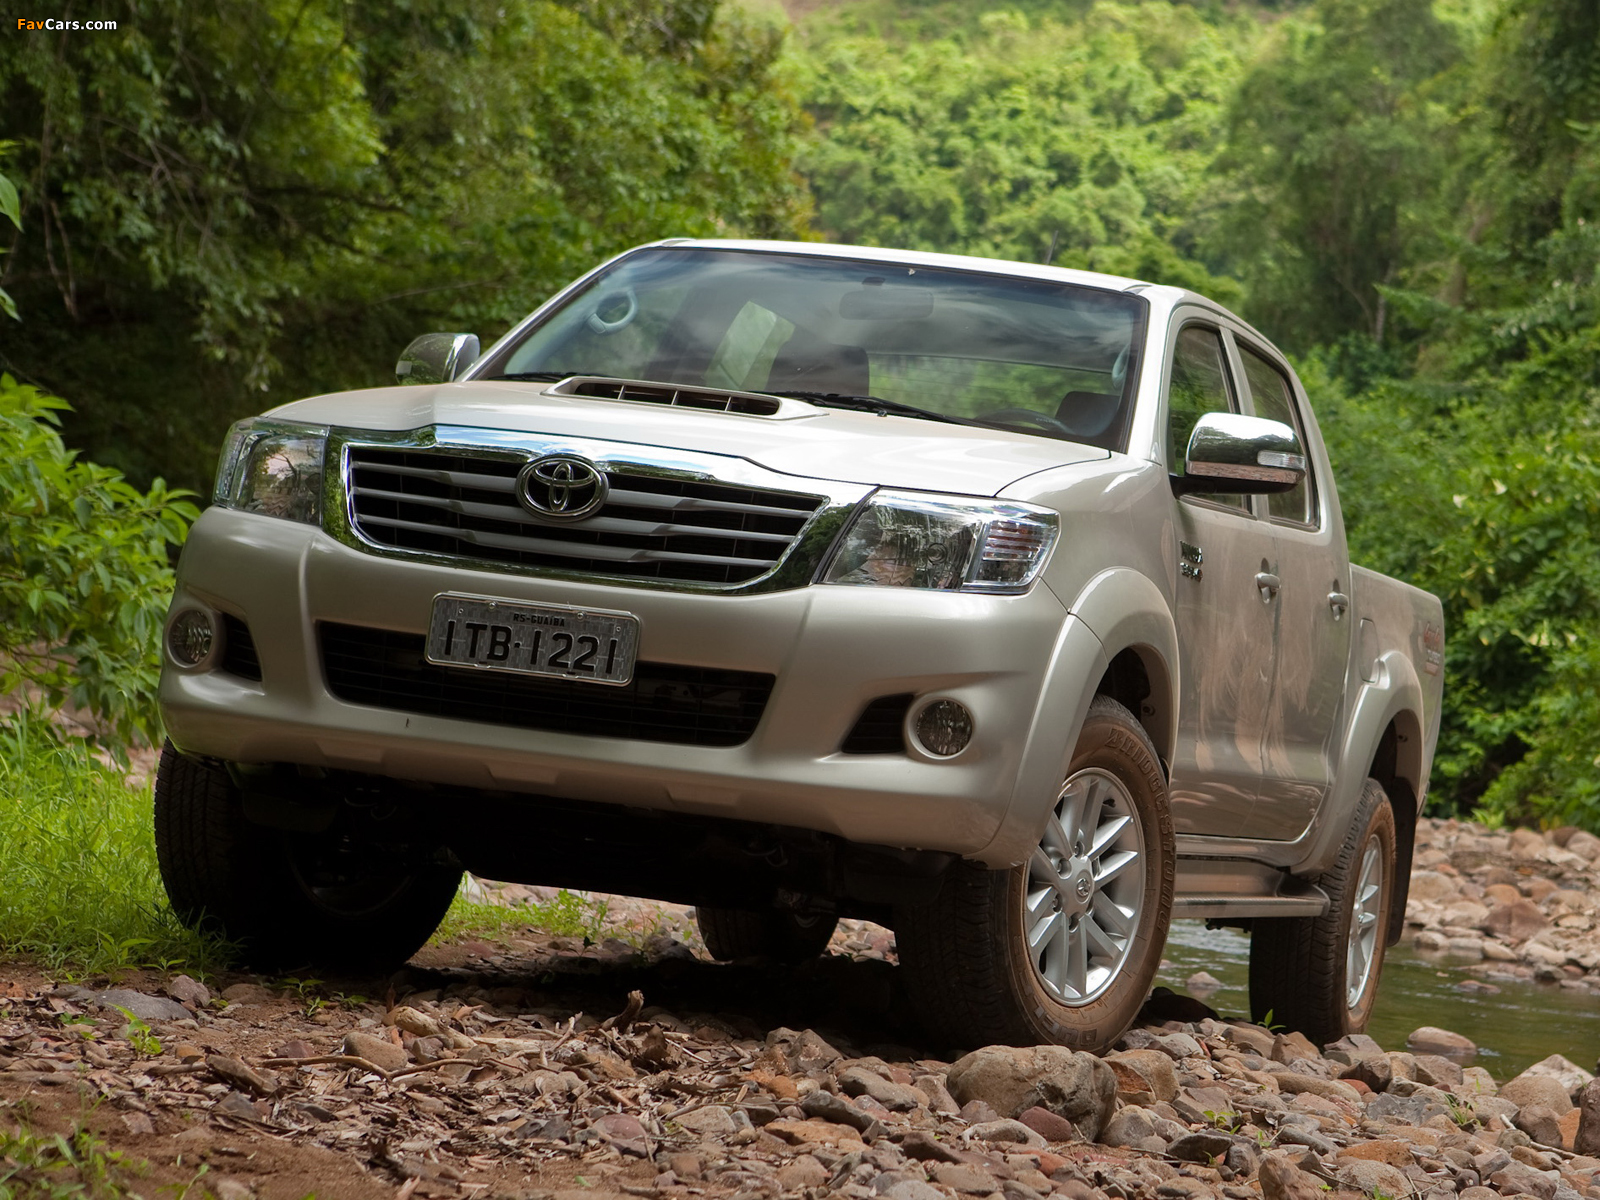 Toyota Hilux SRV Cabine Dupla 4x4 2012 pictures (1600 x 1200)